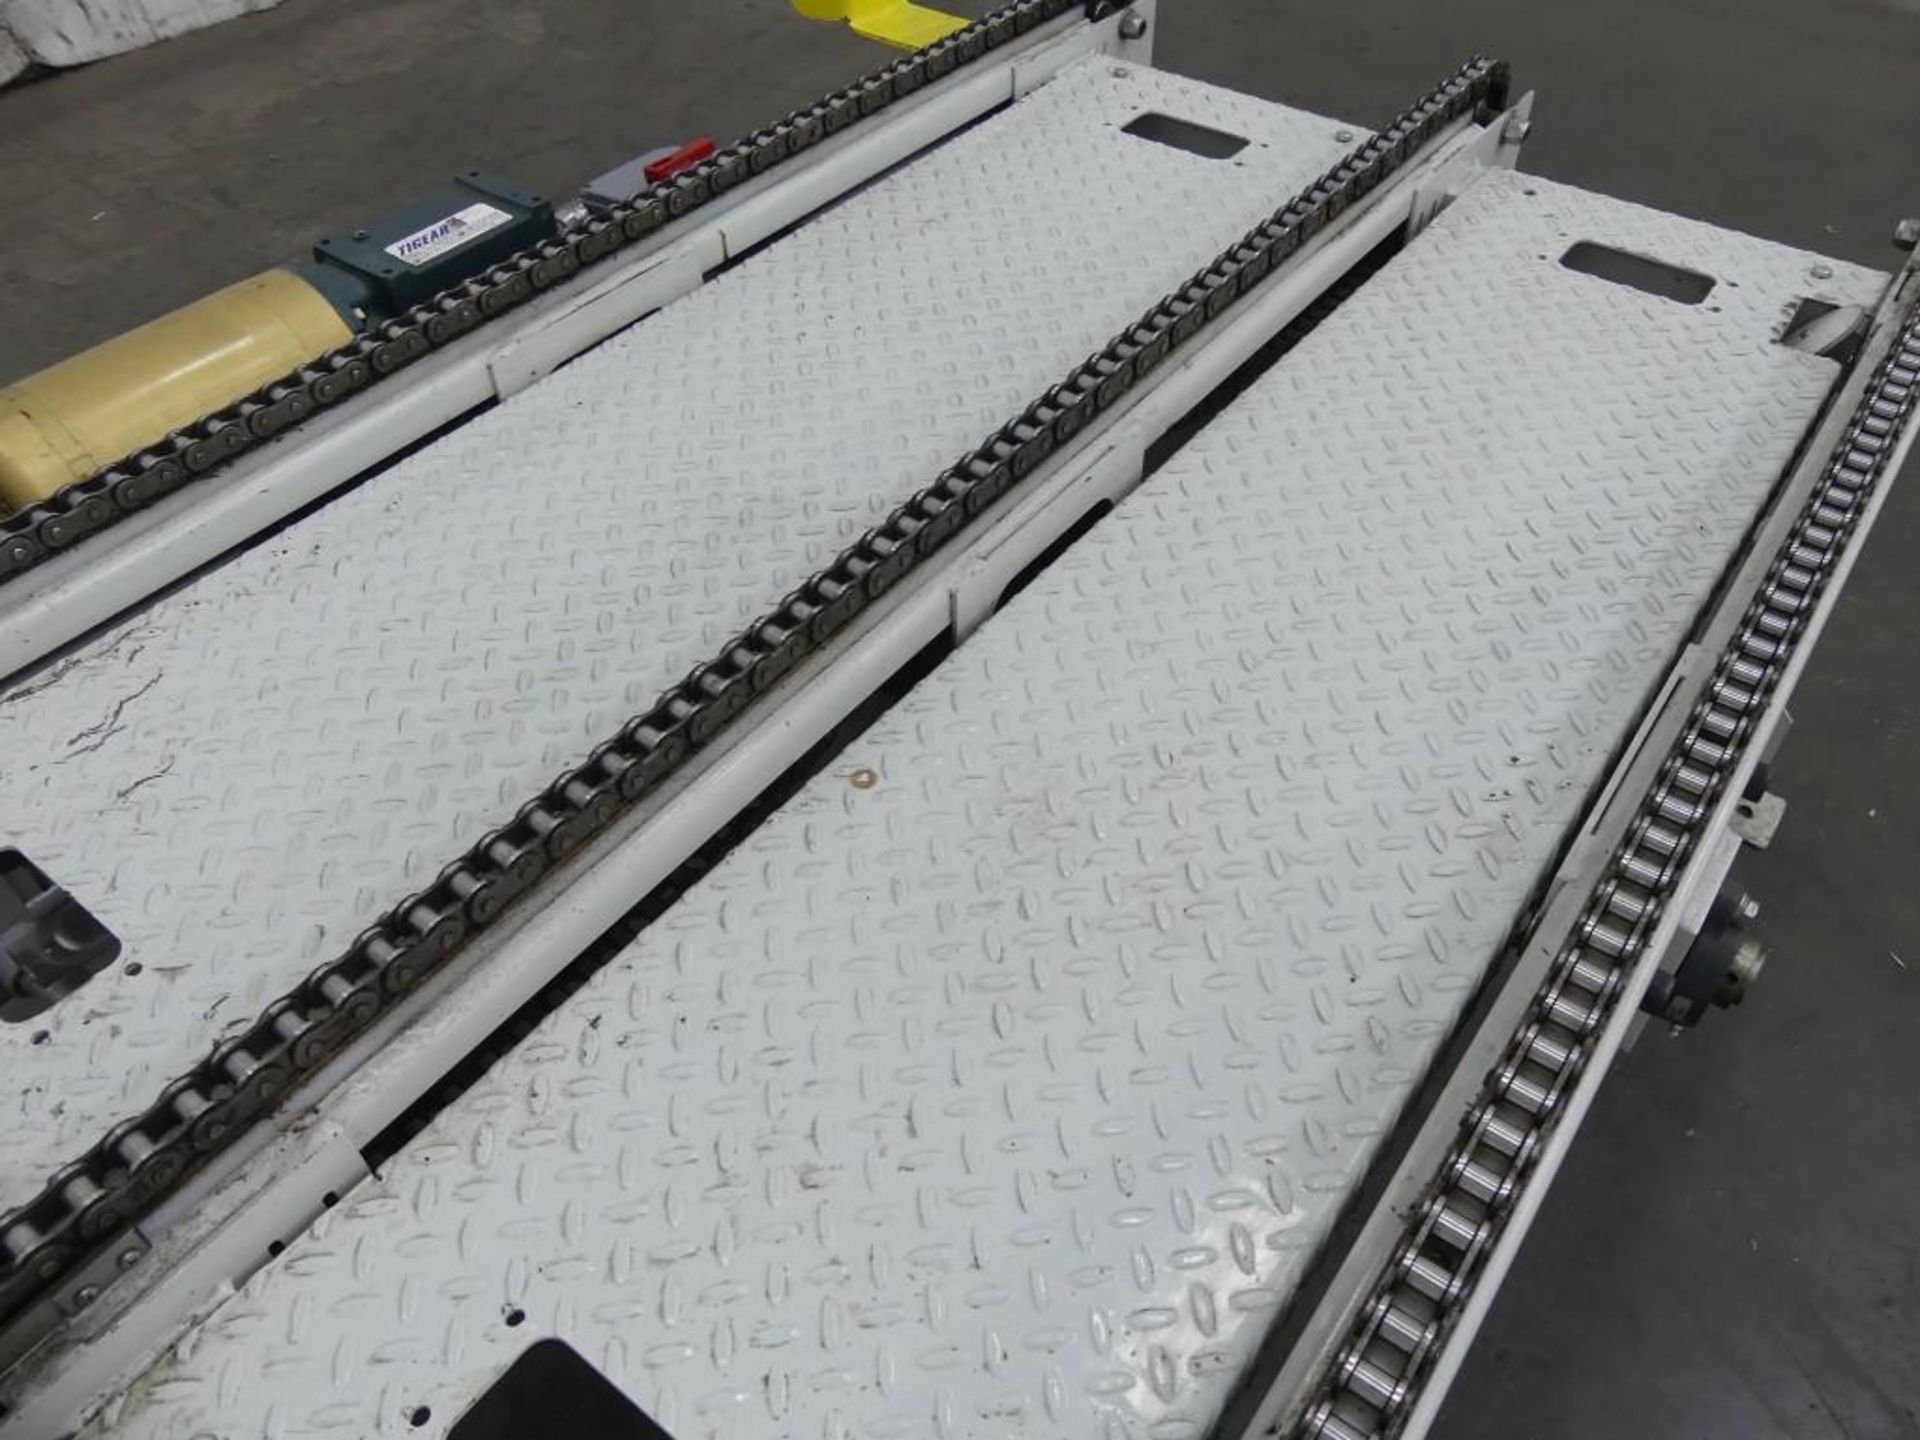 vonGAL 37 Inch x 66 Inch Chain Pallet Conveyor - Image 2 of 6